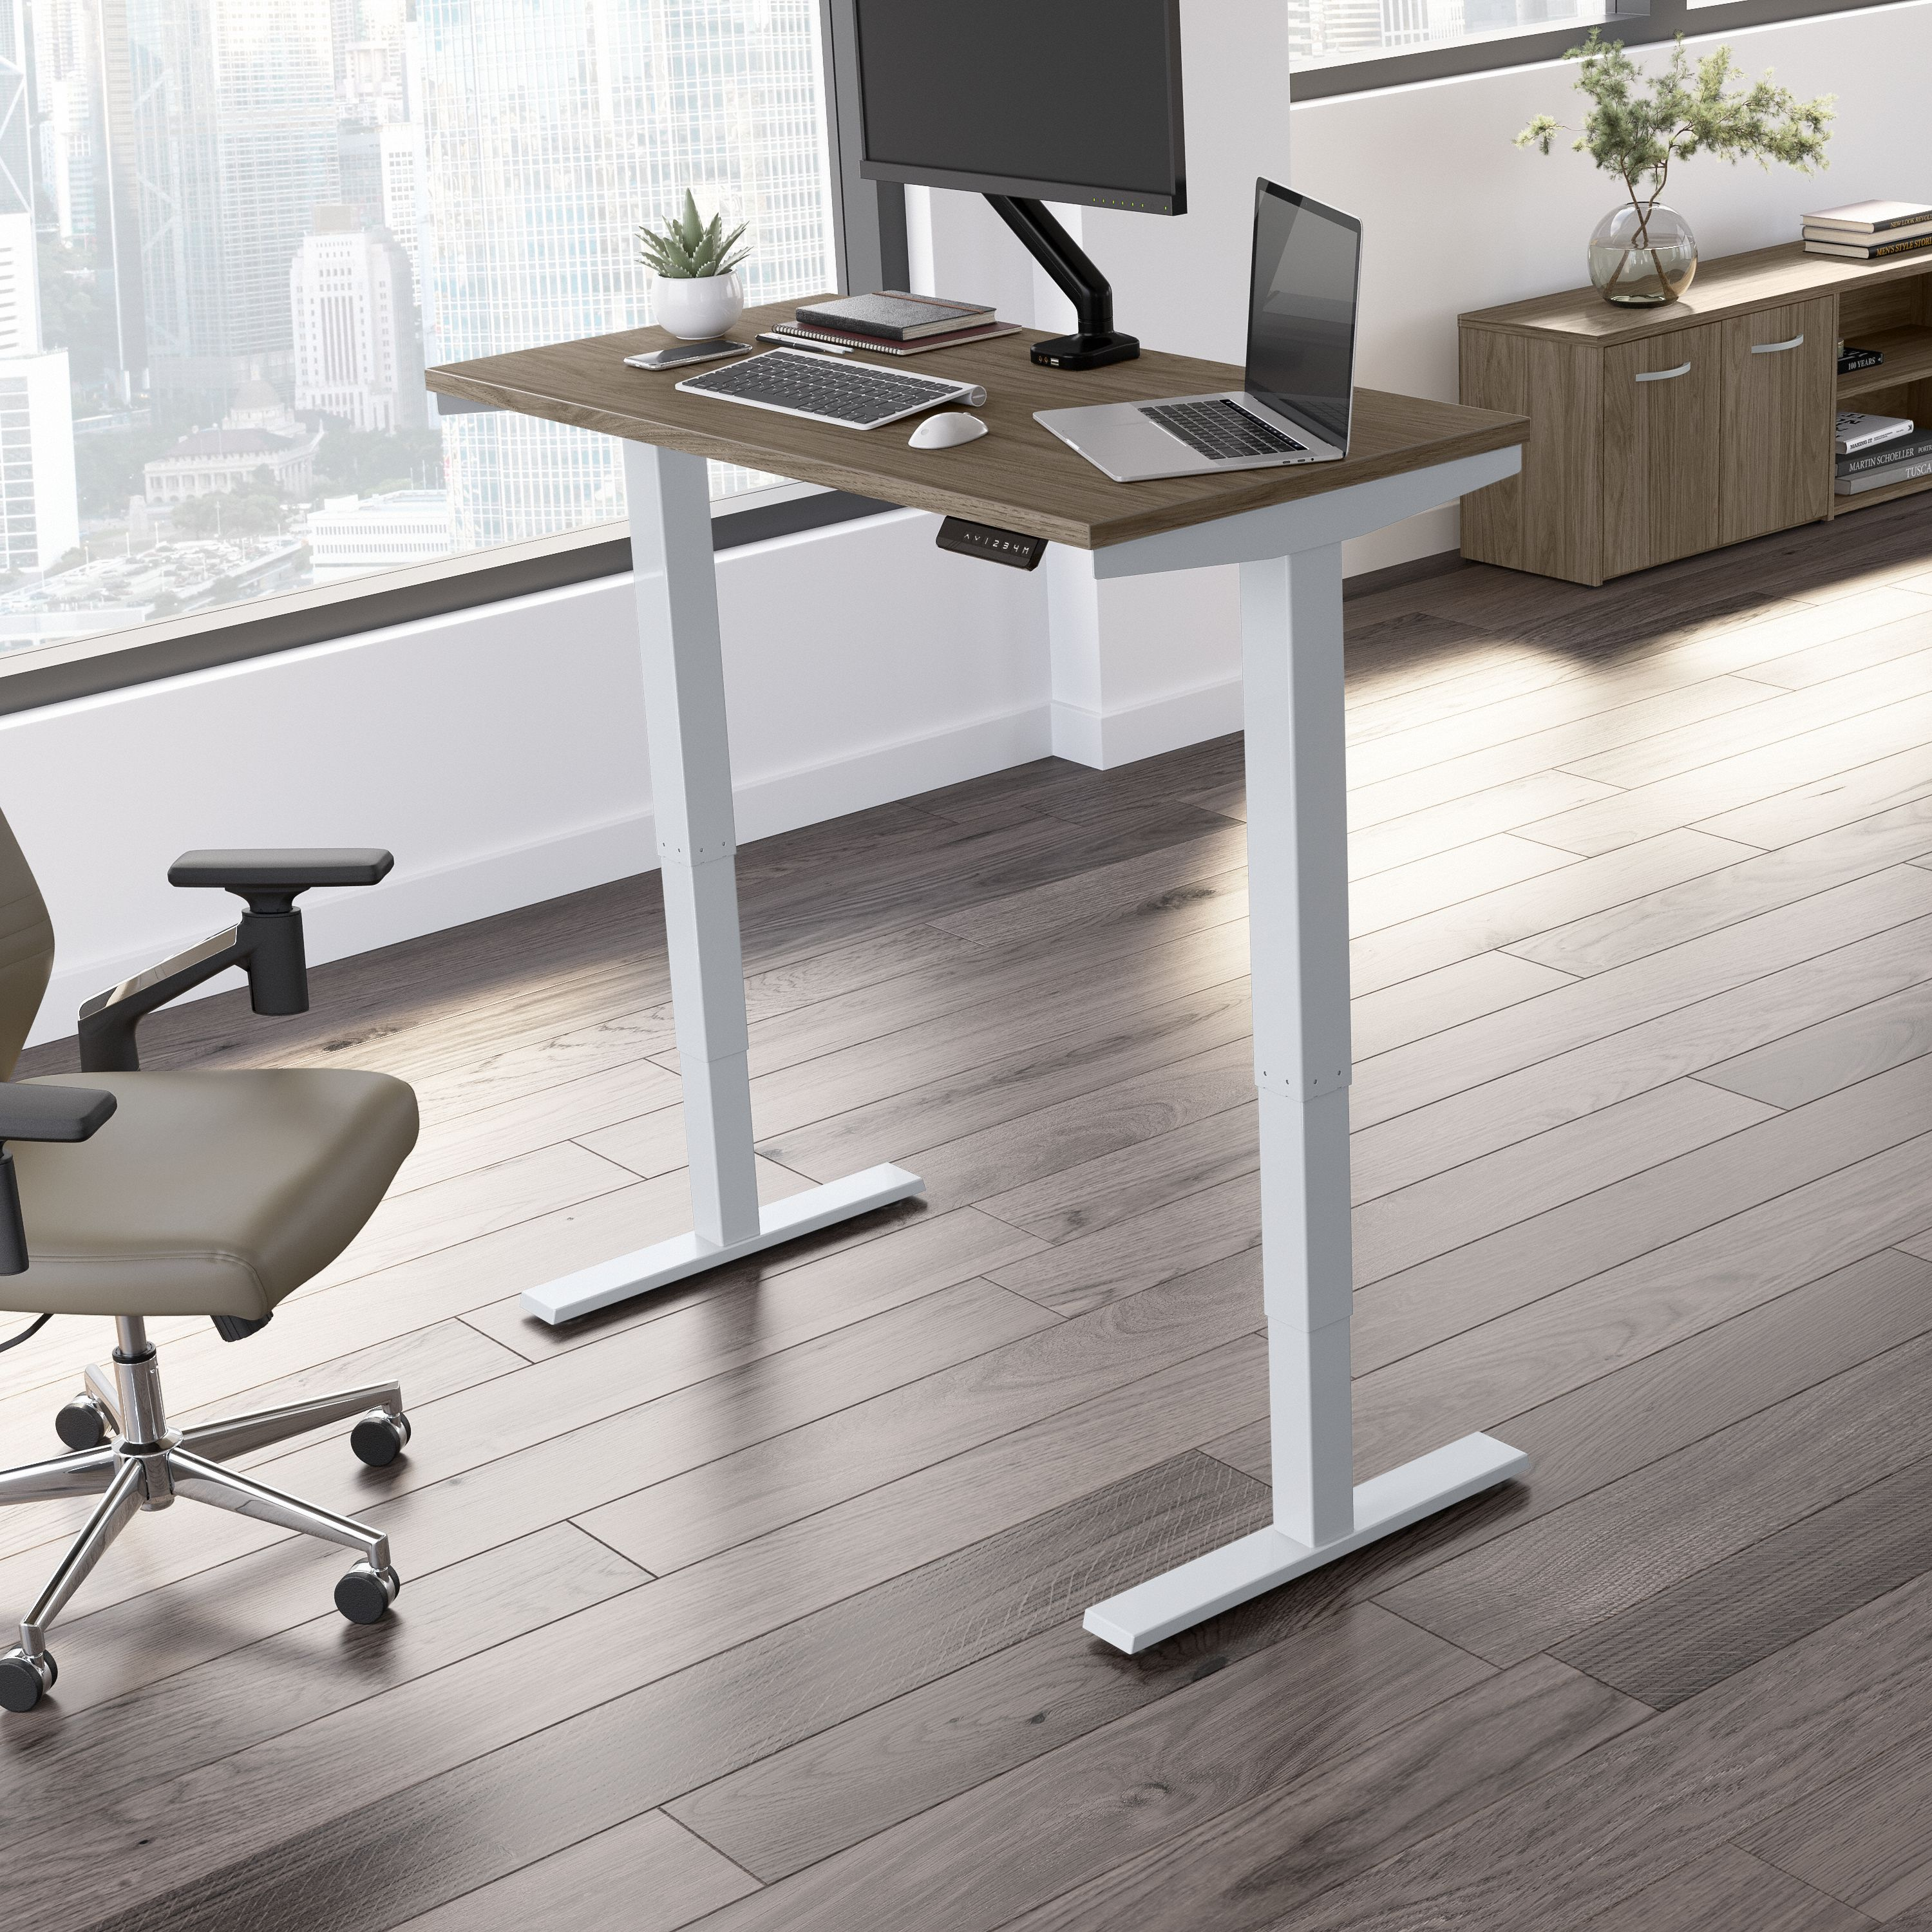 Shop Move 40 Series by Bush Business Furniture 48W x 24D Electric Height Adjustable Standing Desk 01 M4S4824MHSK #color_modern hickory/cool gray metallic